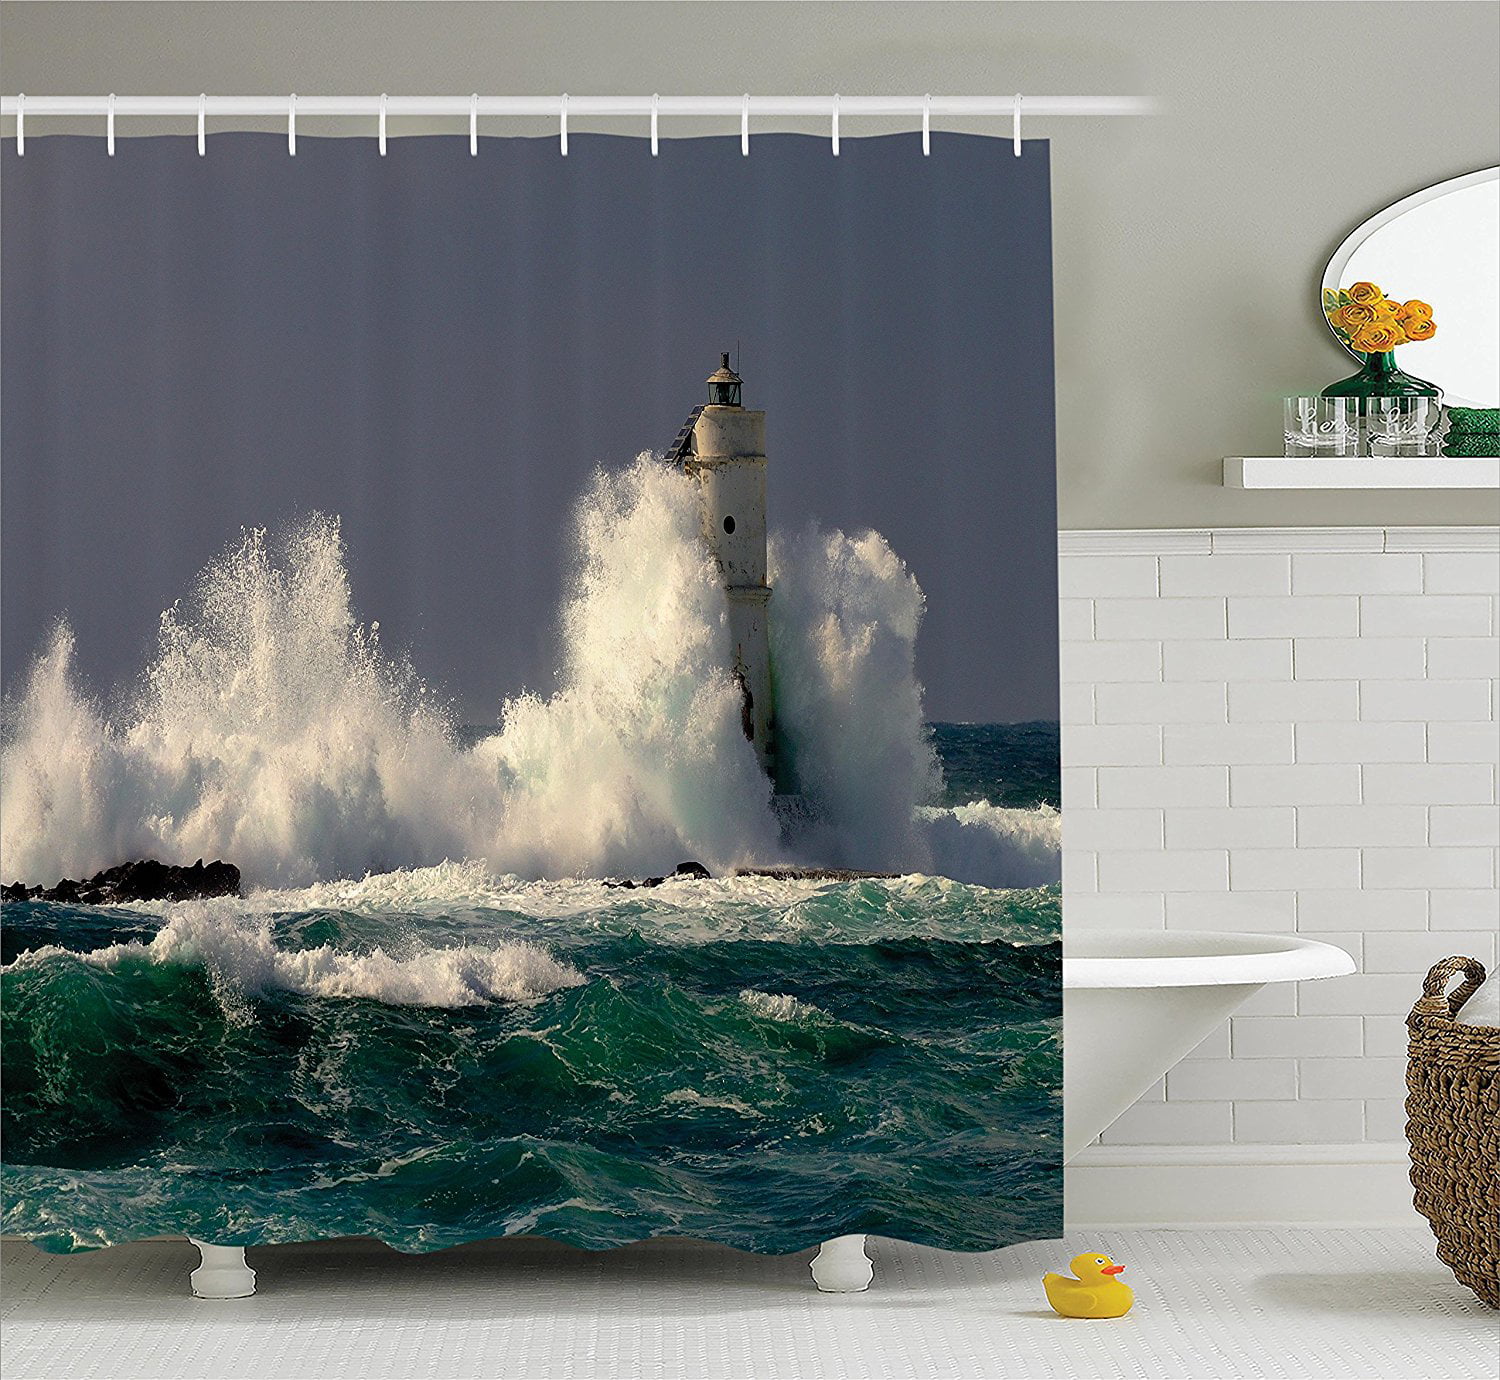 Details about   Green Shower Curtain Pixel Mosaic Love Pattern Print for Bathroom 